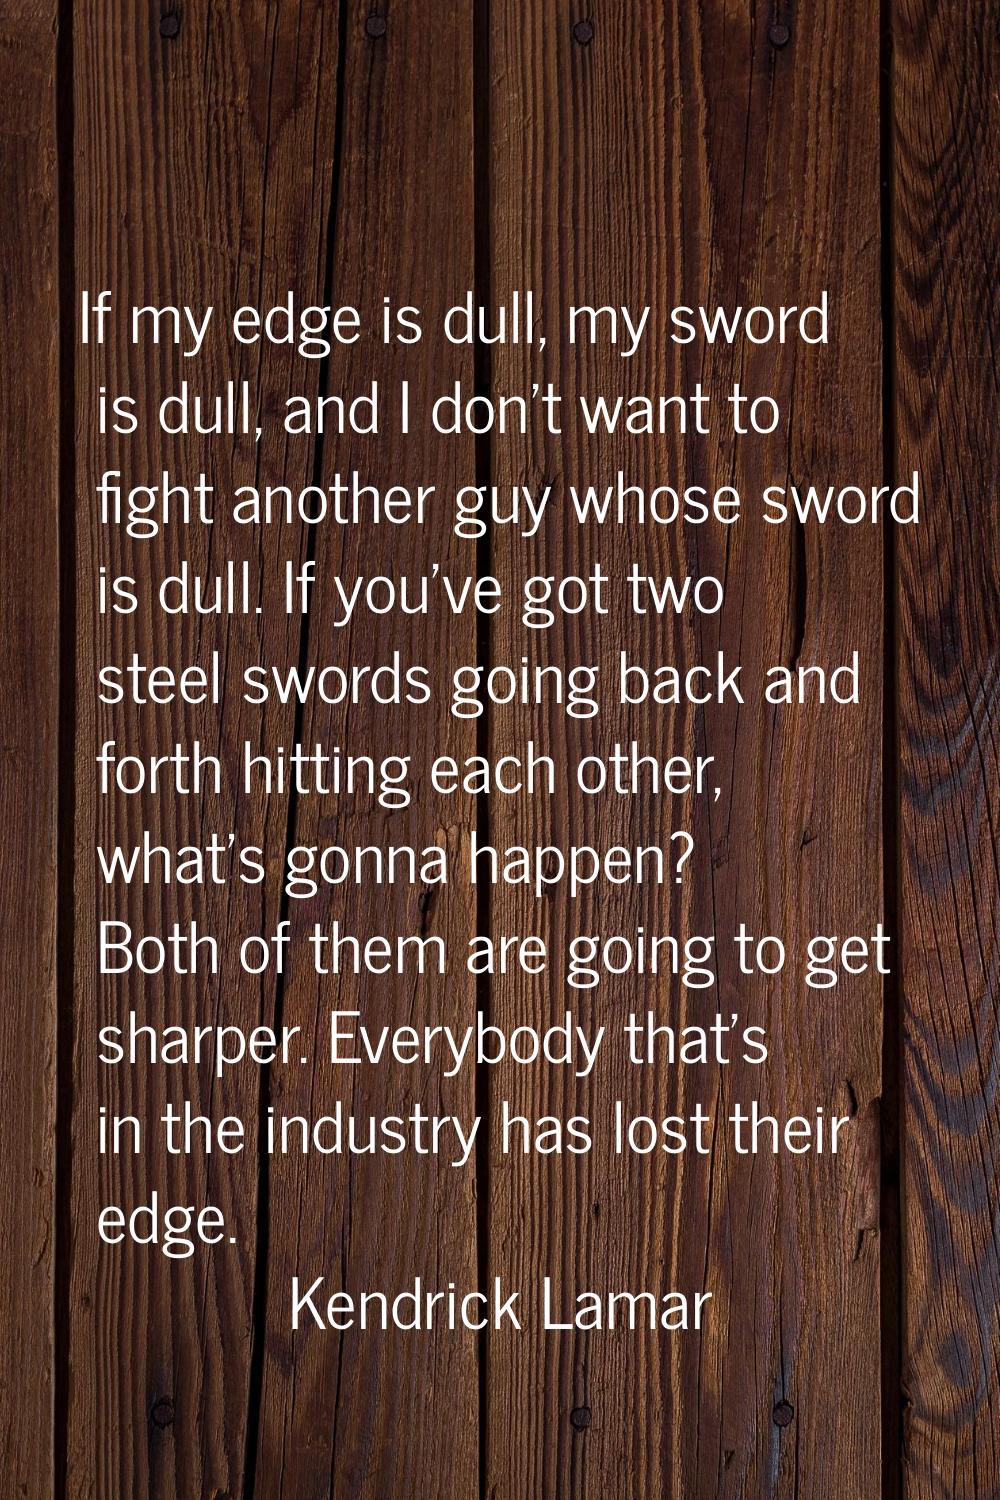 If my edge is dull, my sword is dull, and I don't want to fight another guy whose sword is dull. If